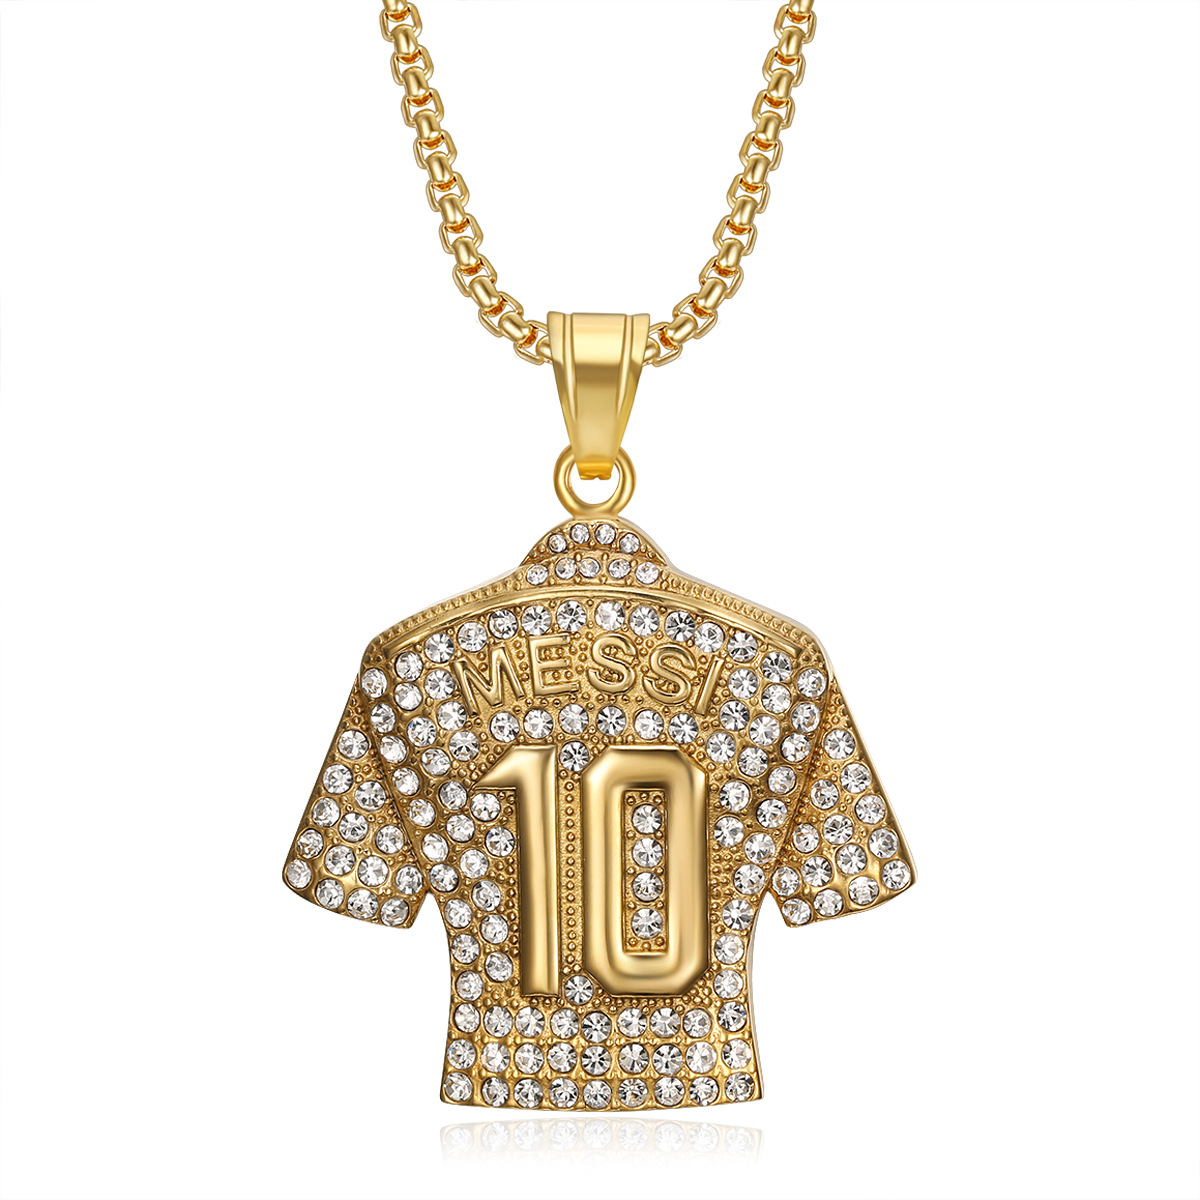 New Hip Hop Hiphop Ornament Titanium Steel Gold-Plated Diamond Football Messi Massey No. 10 Jersey Pendant Necklace